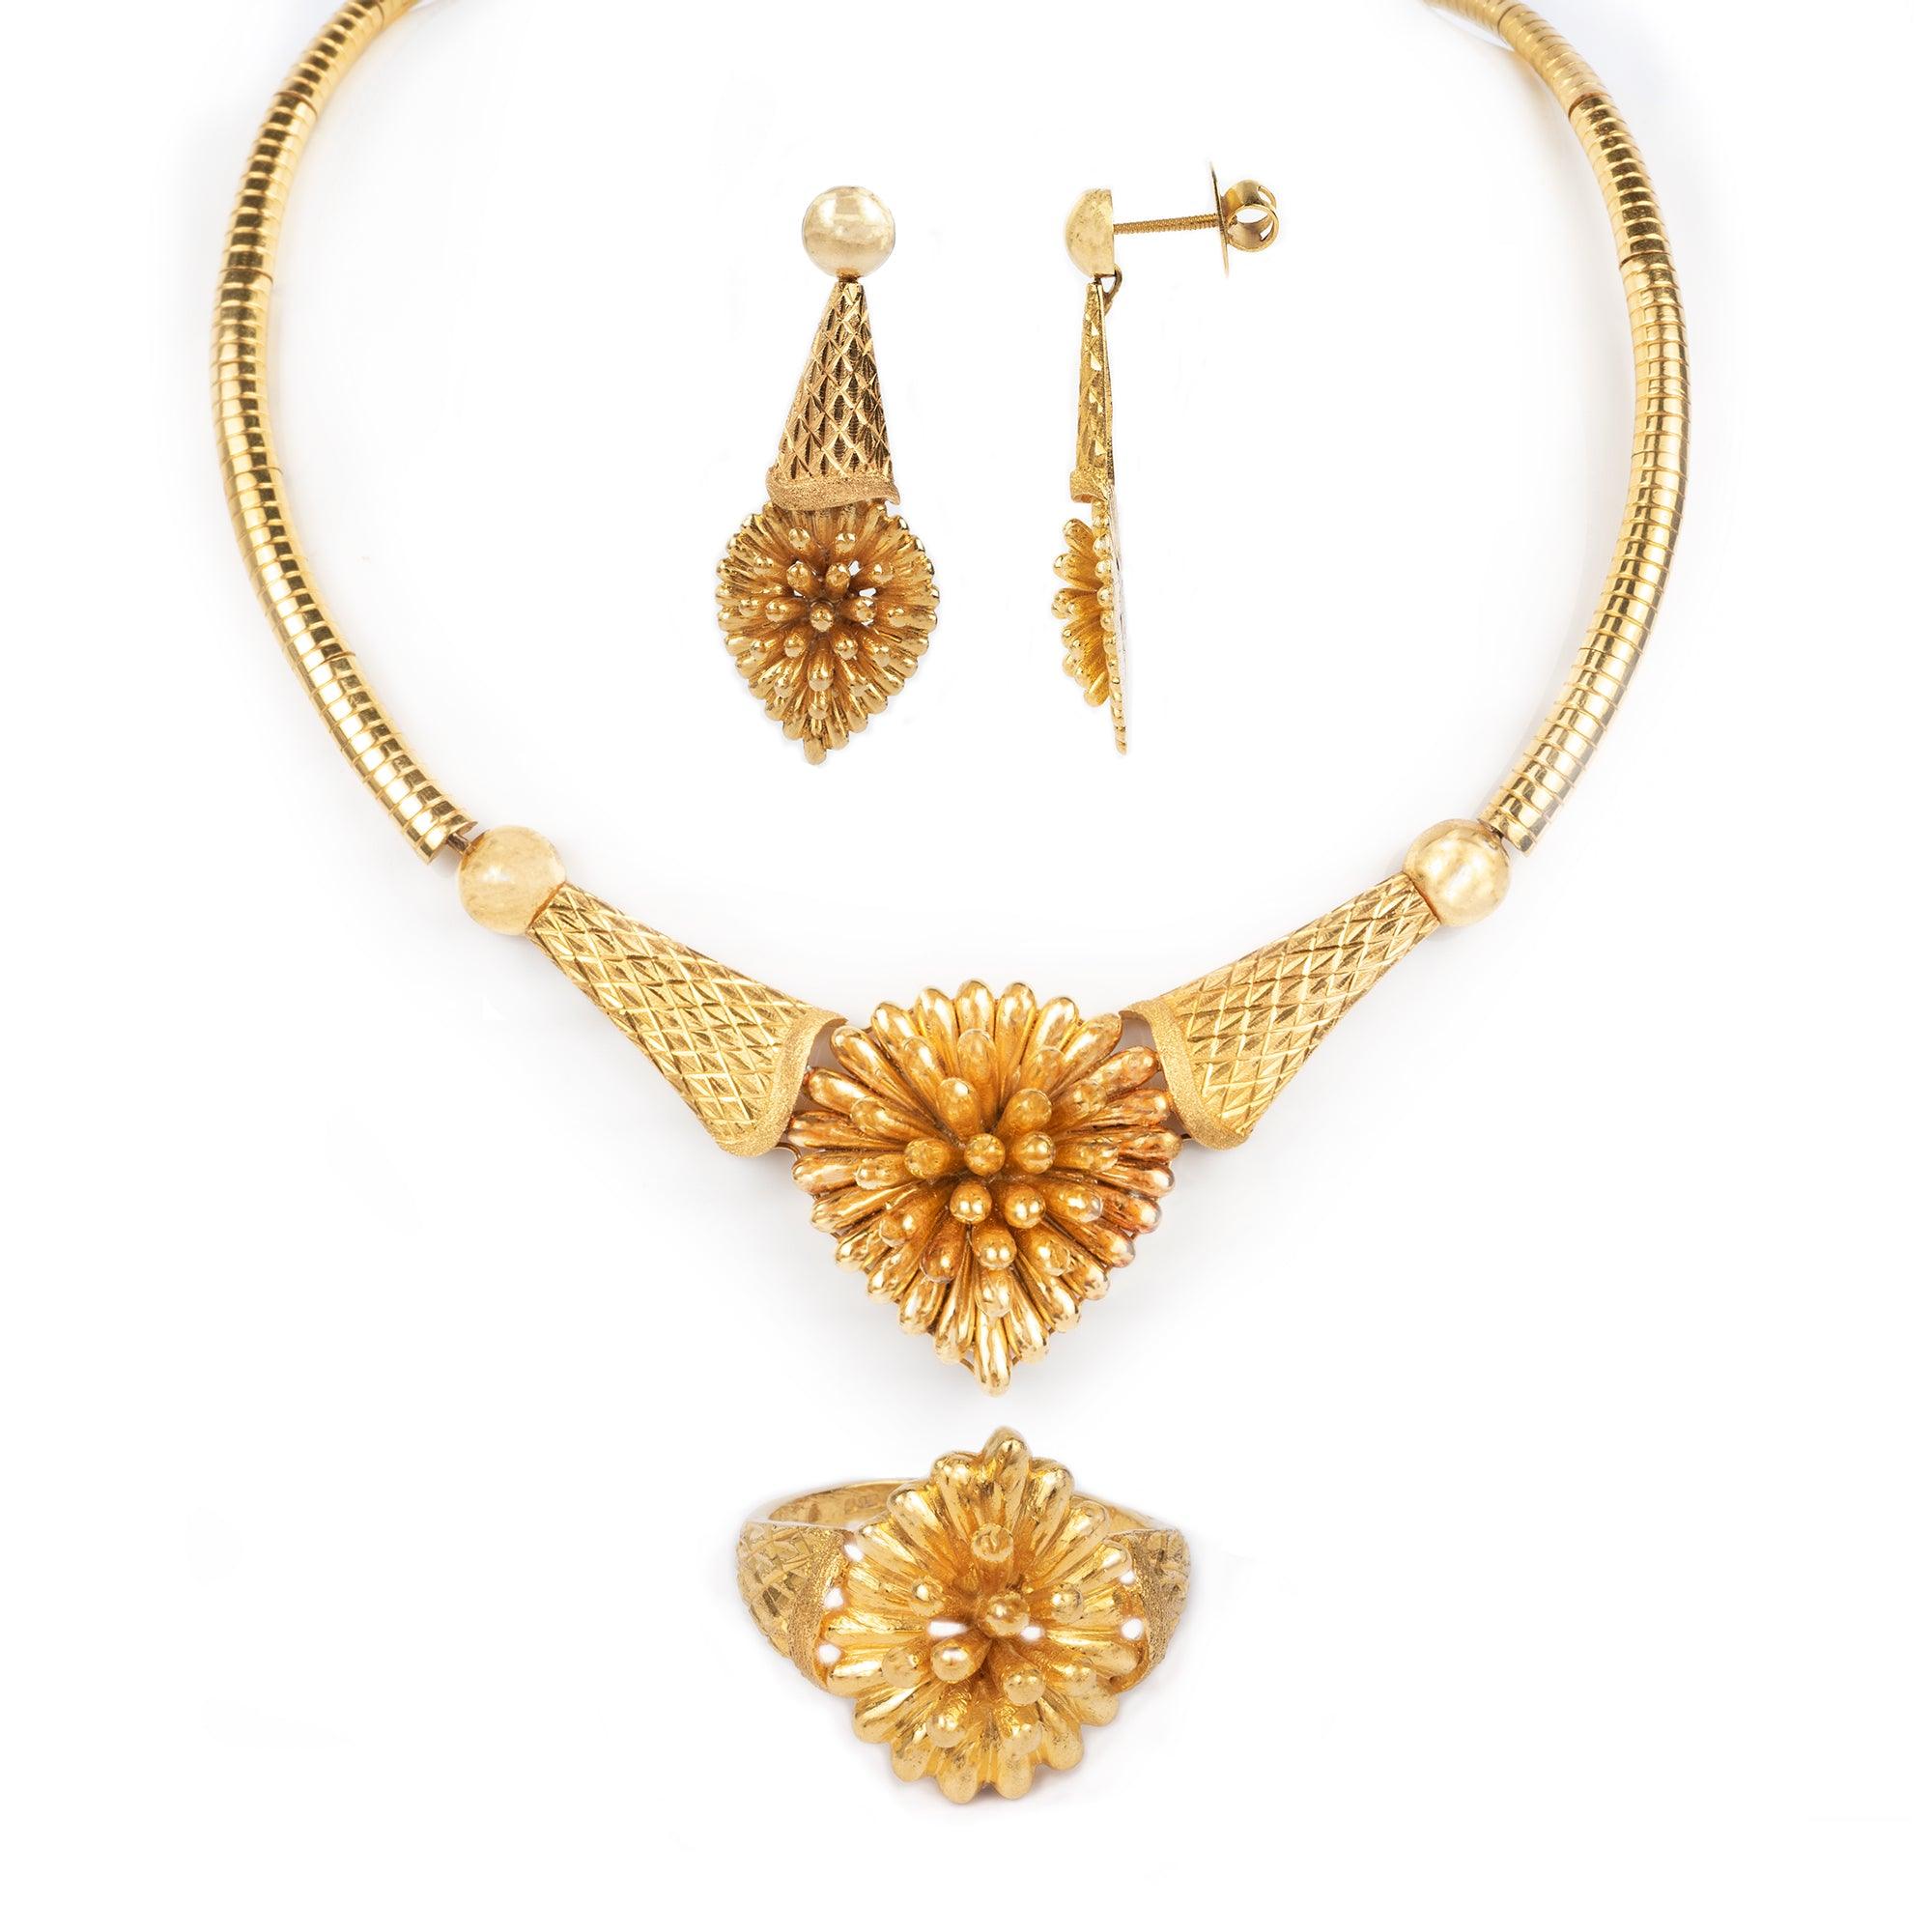 22ct Gold Choker Style Necklace, Drop Earrings and Cocktail Ring set (88.3g) N&E&LR-8011